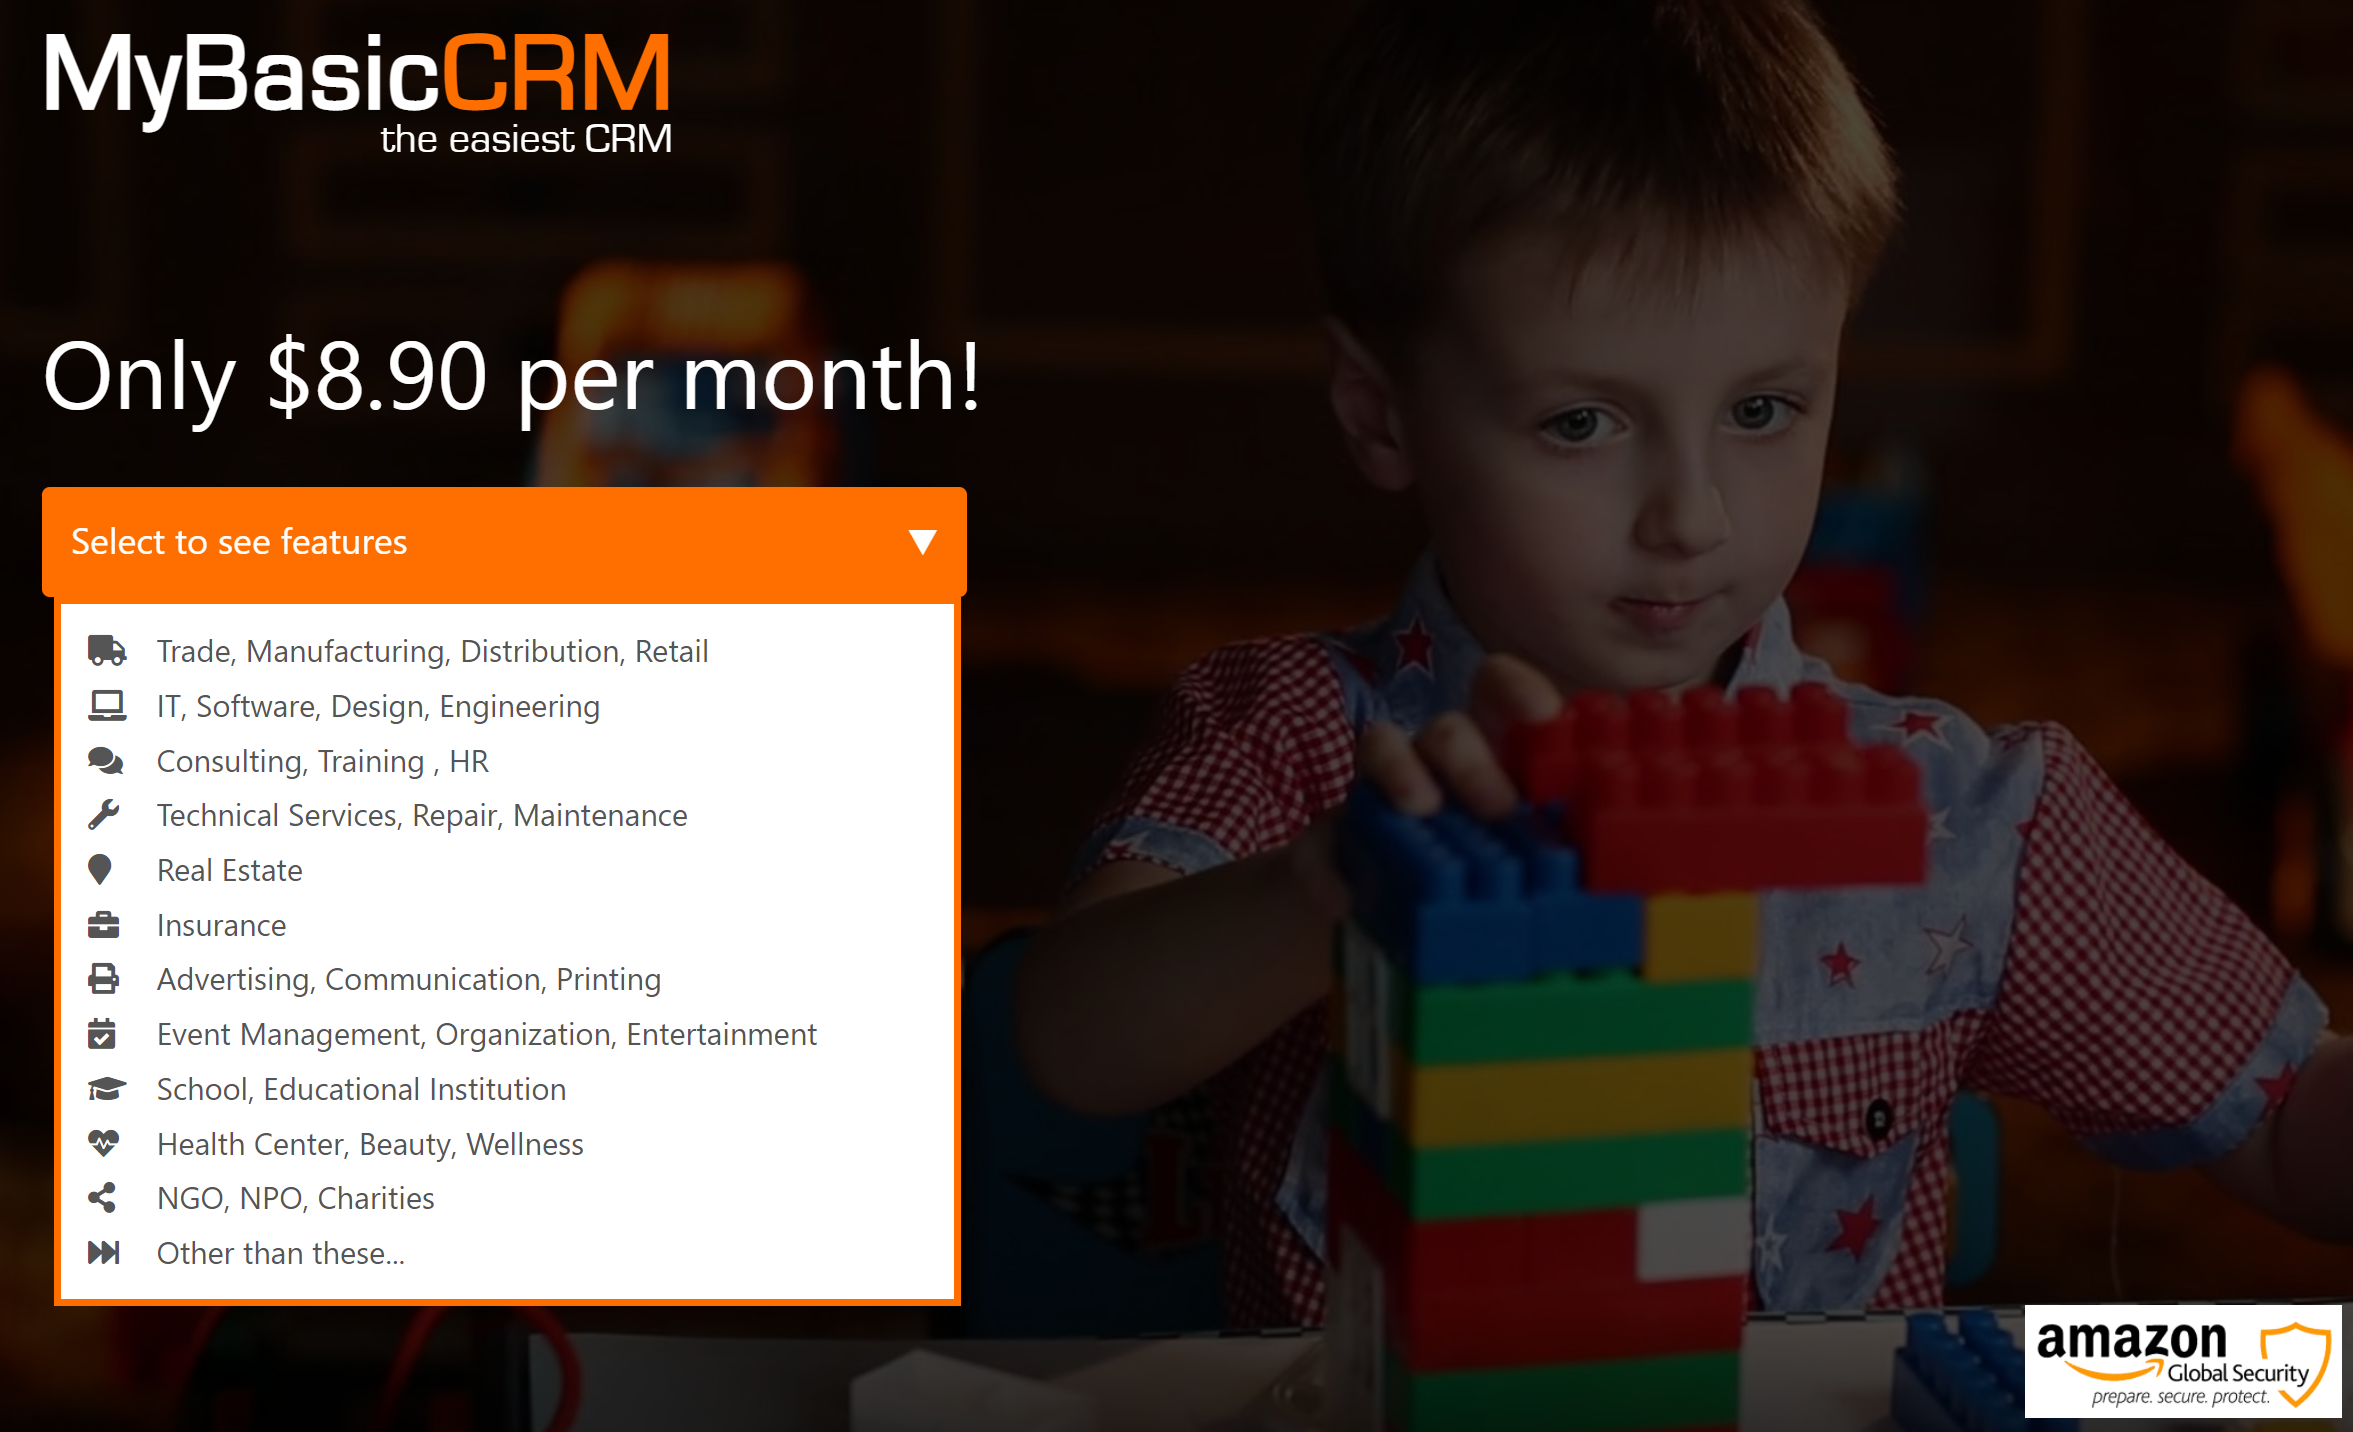 MyBasicCRM Software - Sectoral solutions and pricing